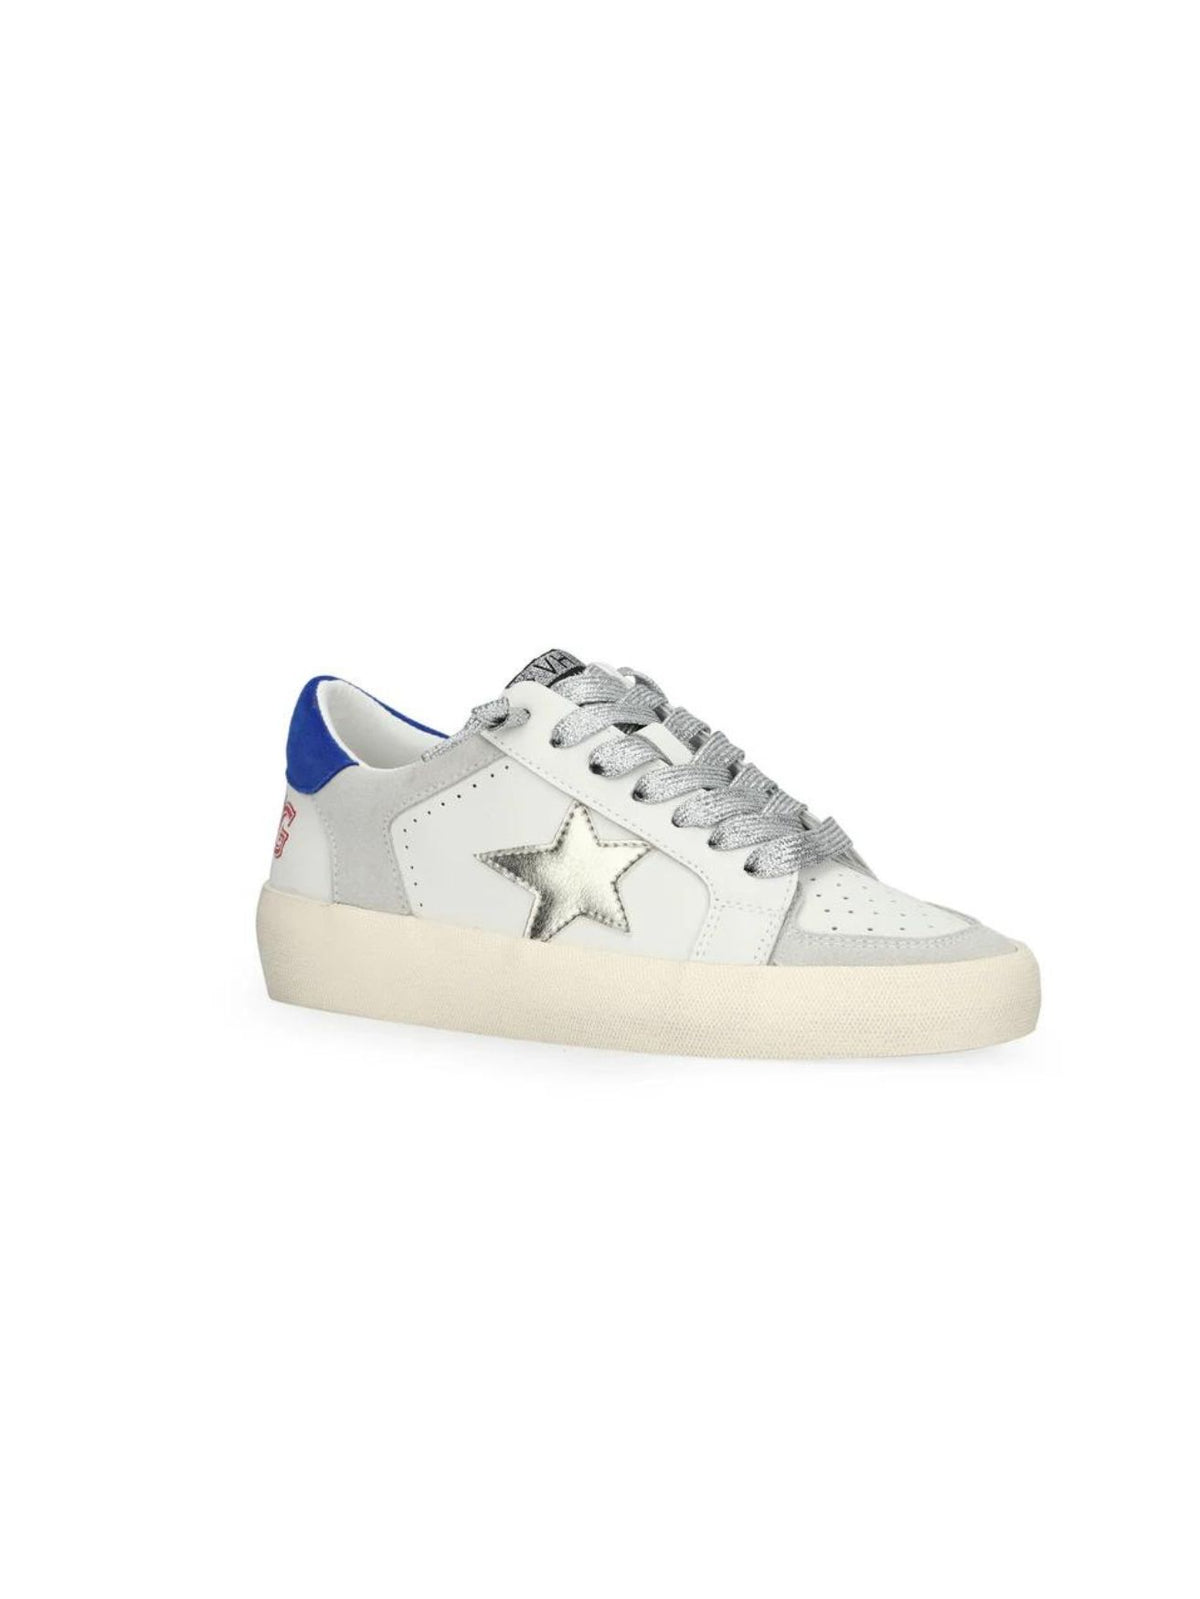 vintage havana reflex 28 colorblock metallic star sneaker in washed blue red-angled view